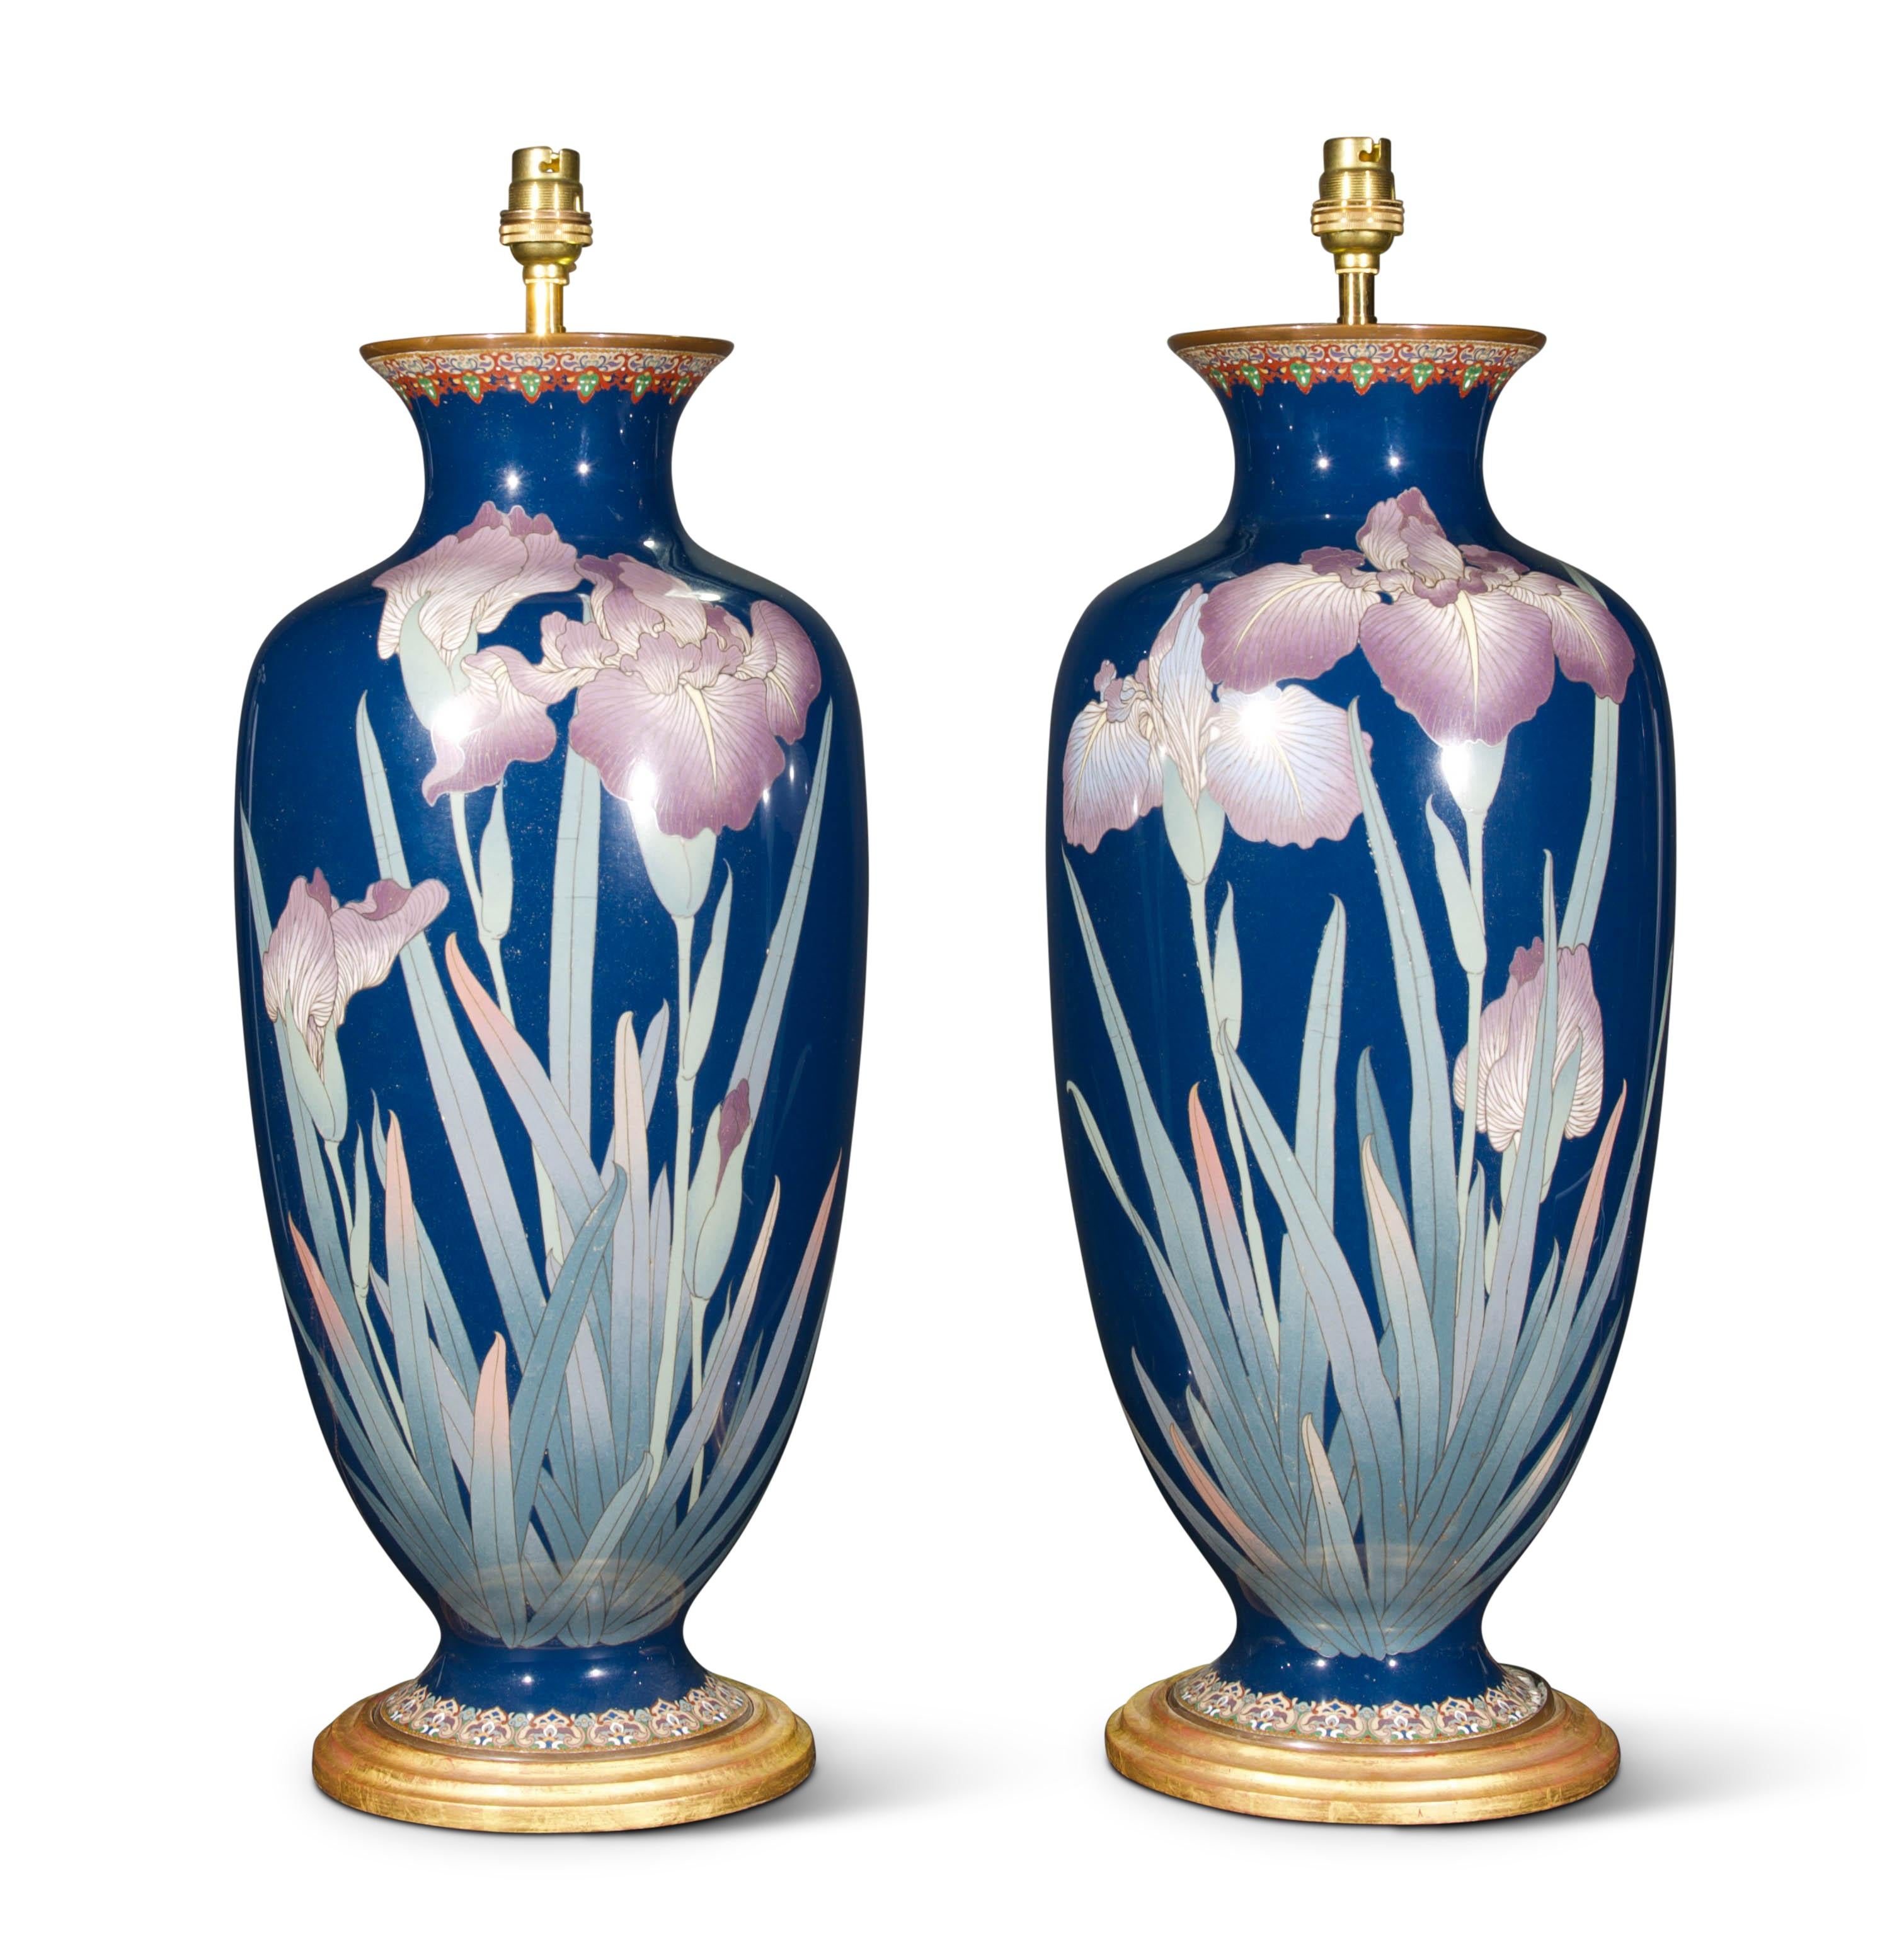 A fine pair of large Japanese Meiji period cloisonné enamel baluster vases, decorated with wonderful irises on a deep blue ground, now mounted as lamps each with a hand-gilded turned base.

Height of vases: 19 1/4 in (49 cm) including gilt base,